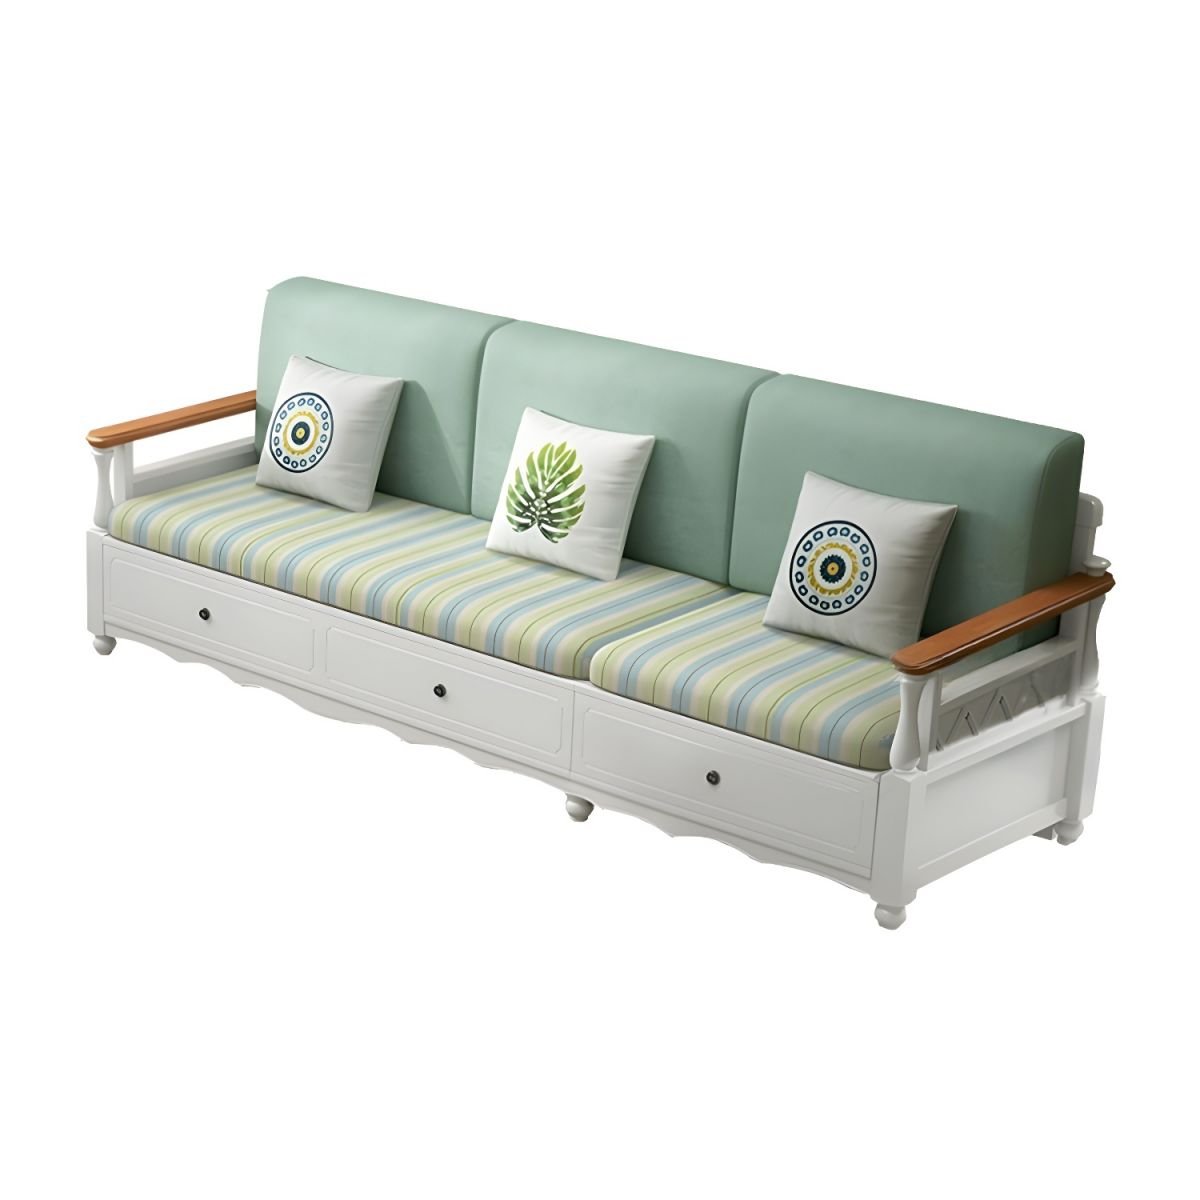 Rustic Green Farmhouse Sectional Sofa with Under-Seat Storage for Shallow Width Comfort - 87"L x 31"W x 35"H Cotton and Linen